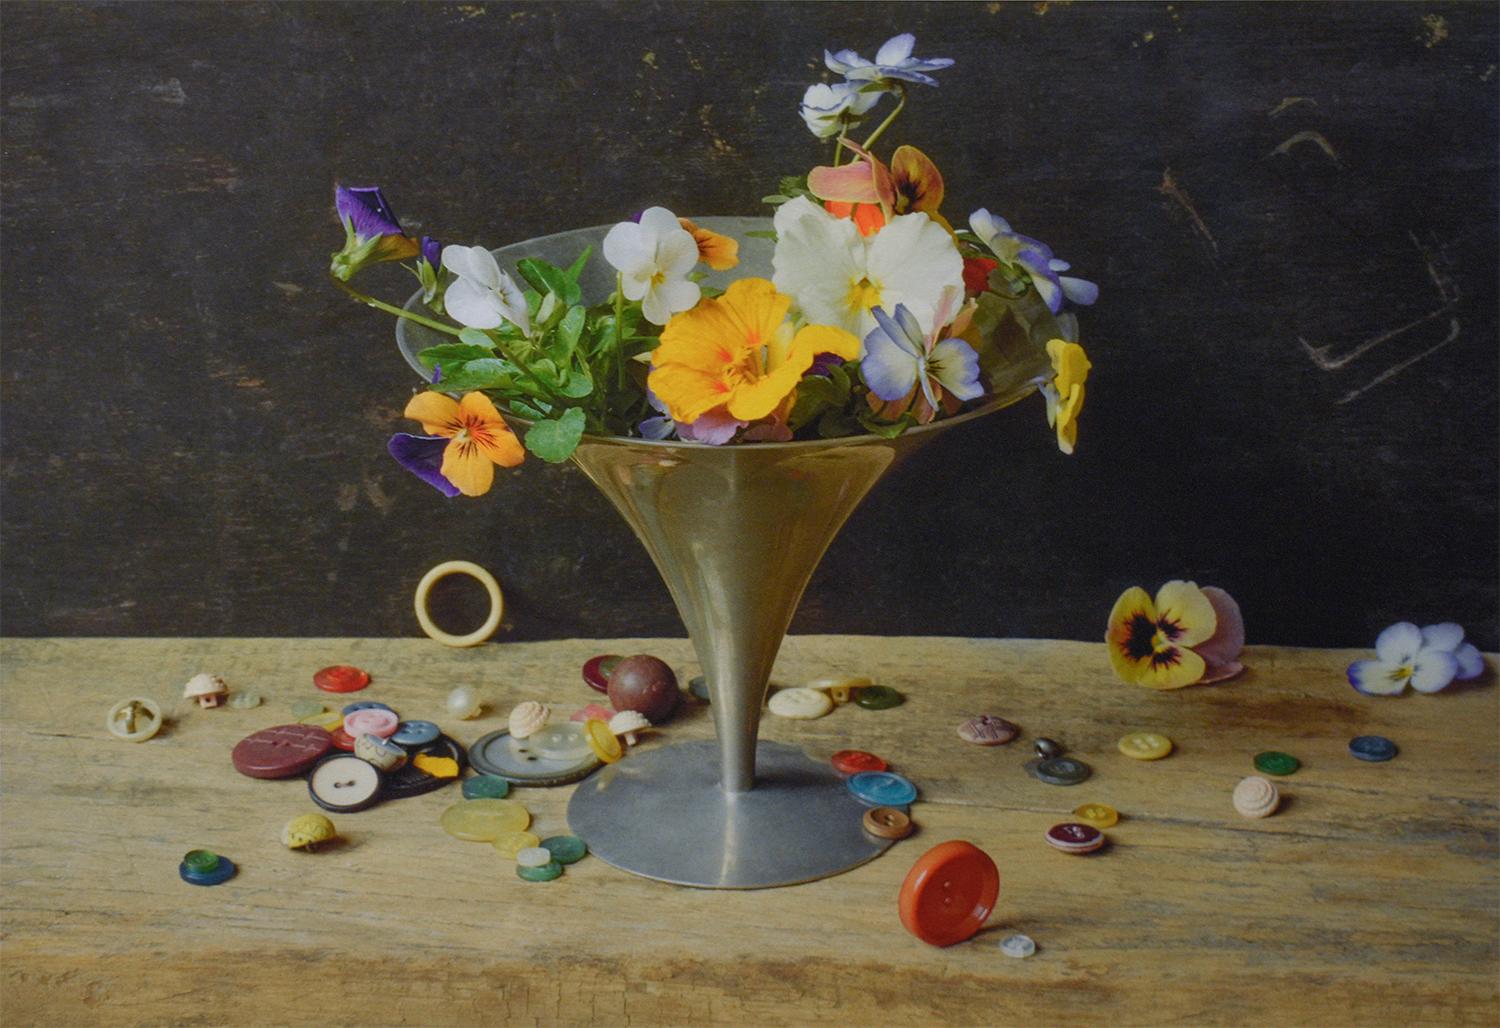 Flowers, Compote & Buttons (Still Life Photograph of Flowers on a Tabletop)